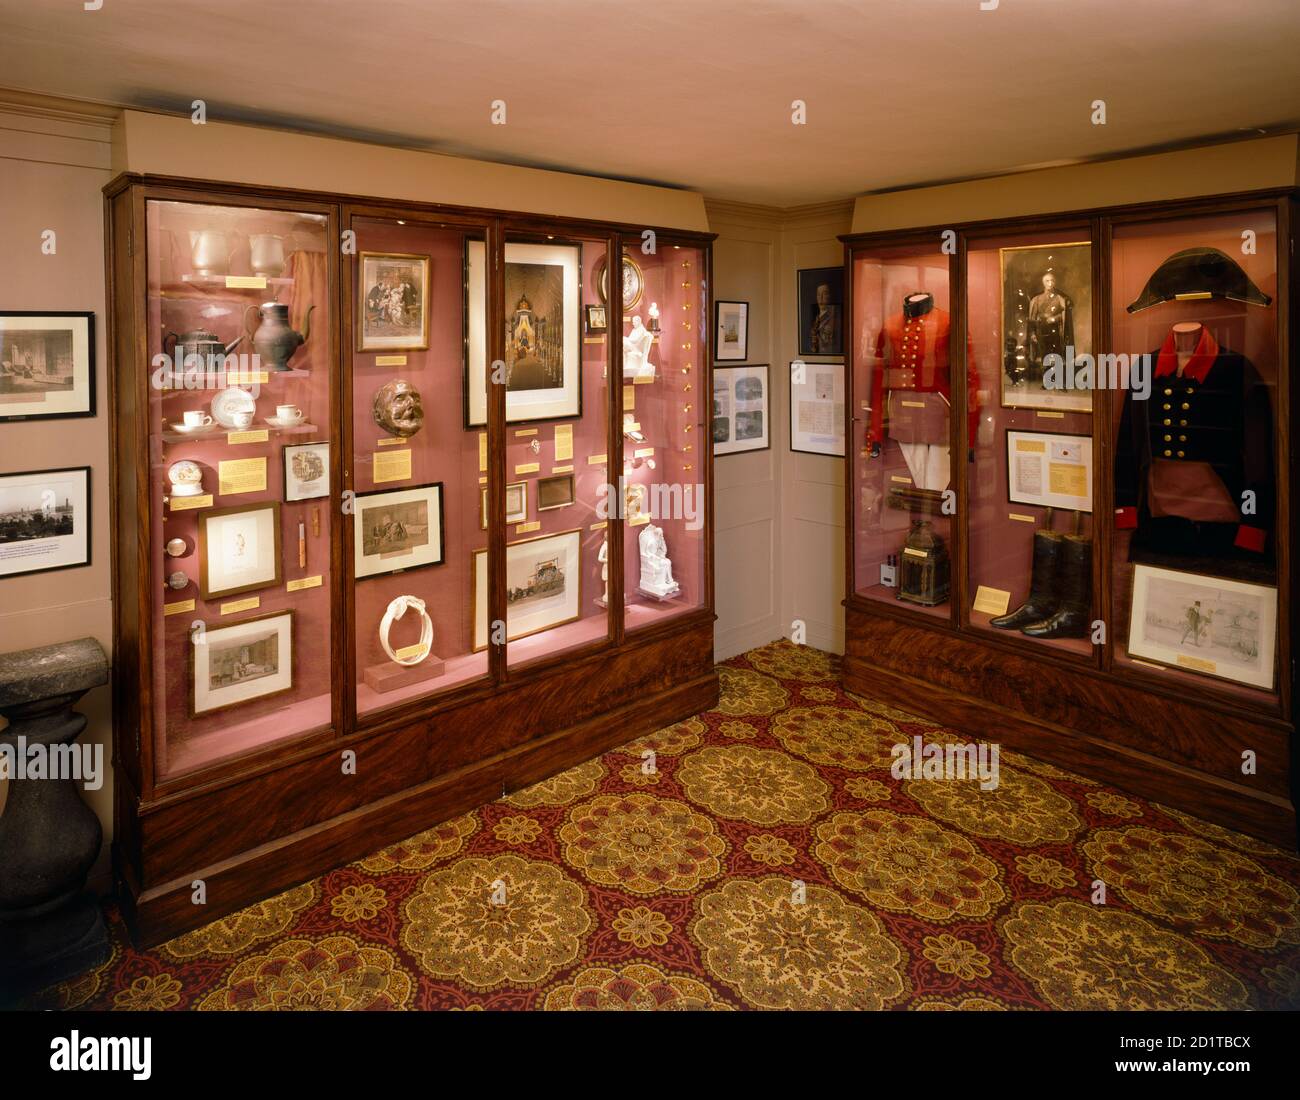 WALMER CASTLE, Kent. Interior view. Cabinets in the Wellington Museum displaying personal items and memorabilia of Sir Arthur Wellesley, Duke of Wellington. The Wellington Museum commemorates the Iron Duke's service as Lord Warden of the Cinque Ports. Stock Photo